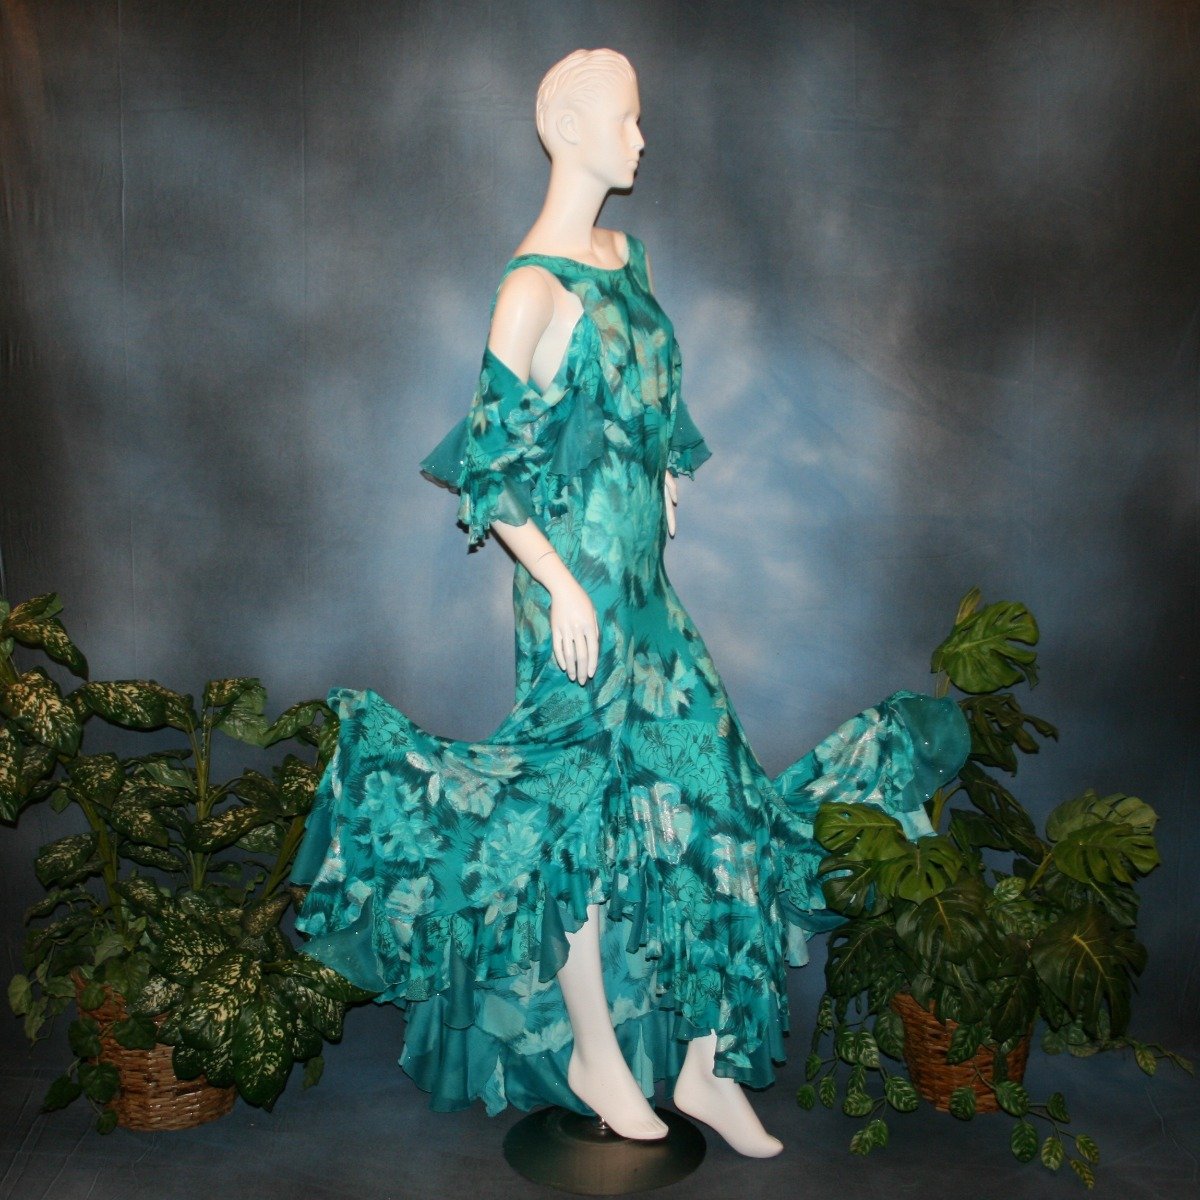 side view of Gorgeous teal tropical print social ballroom dress created in tropical lycra print in shades of teal with a bit of silver sheen accents...absolutely gorgeous fabric! This social ballroom dress features very full skirting with 2 slits & oodles of flounces of the same teal tropical print lycra with intermittent flounces of teal glitter chiffon...along with draping, cold shoulder flounce sleeves...and a low back